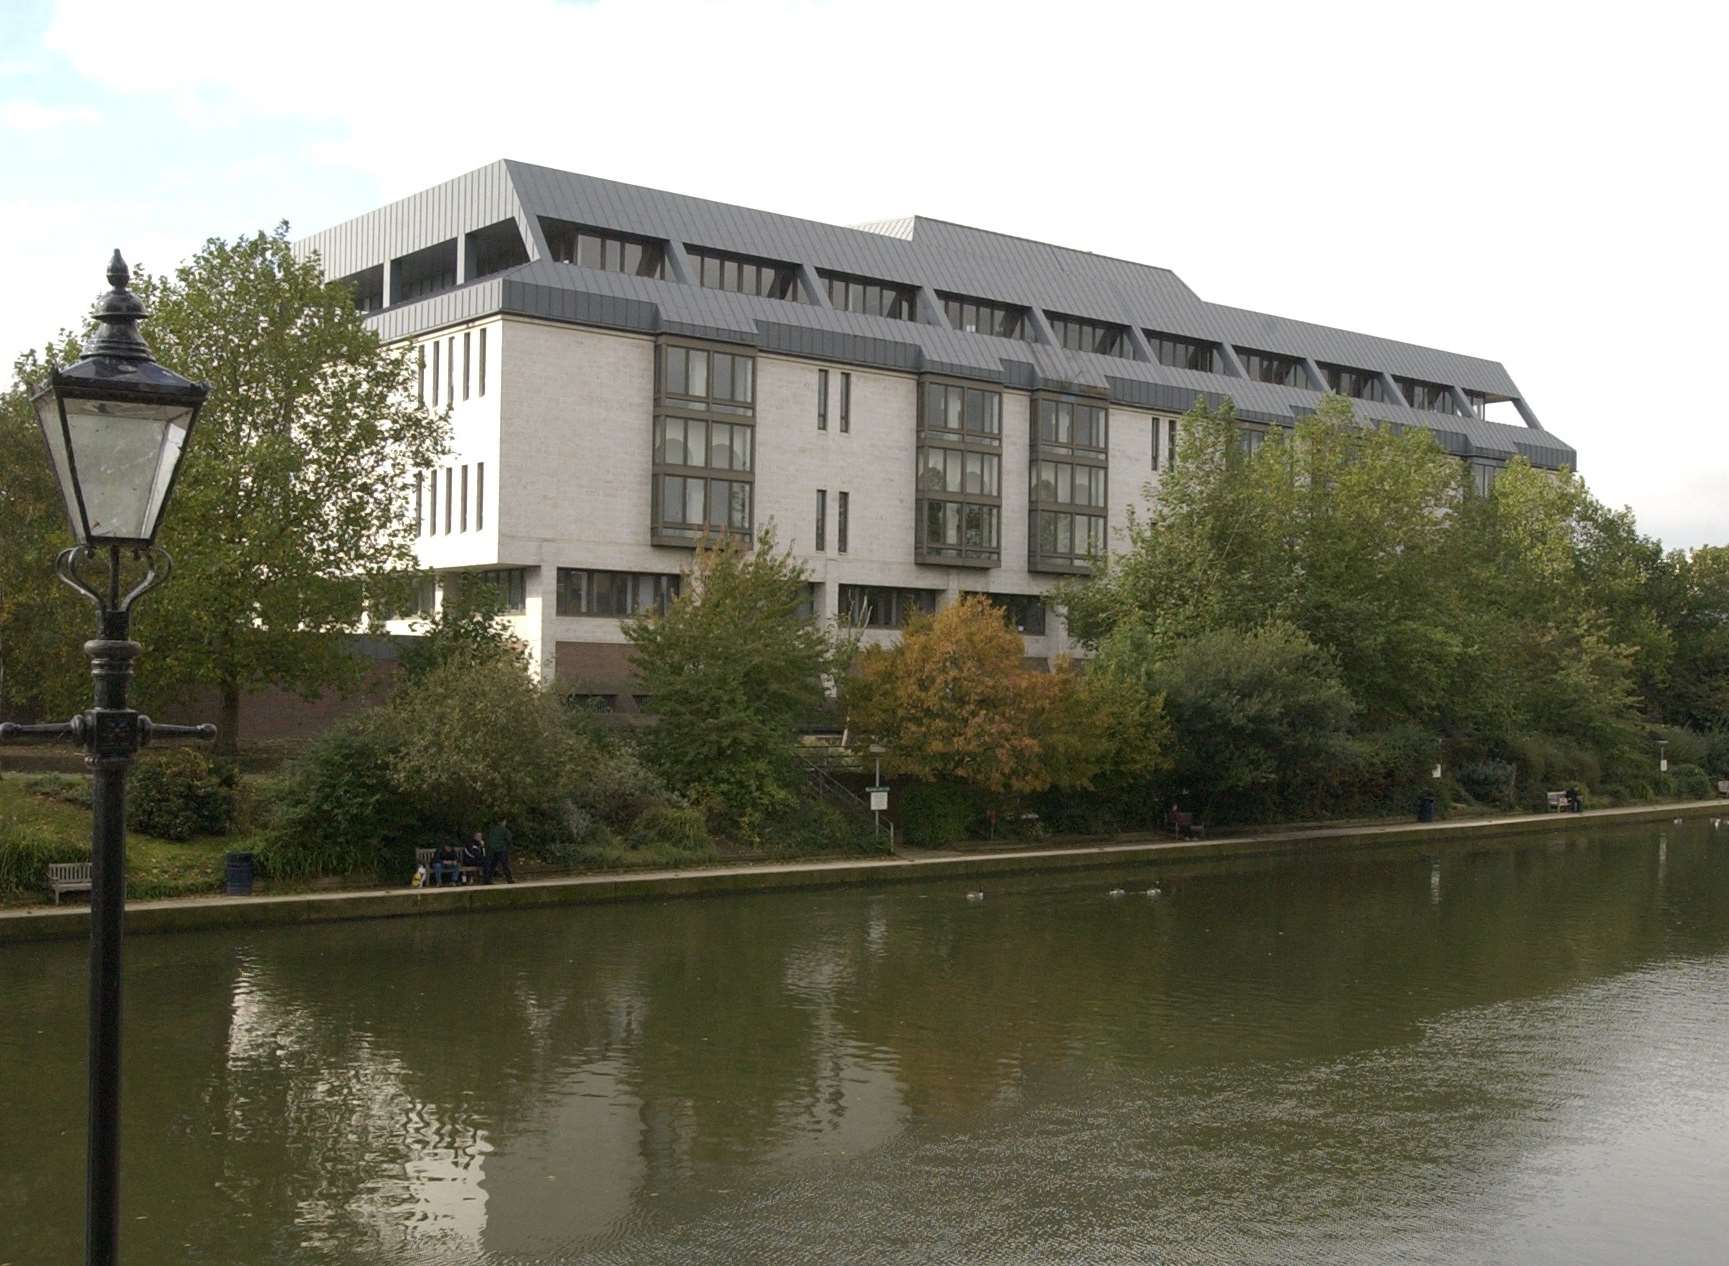 The case was heard at Maidstone Crown Court